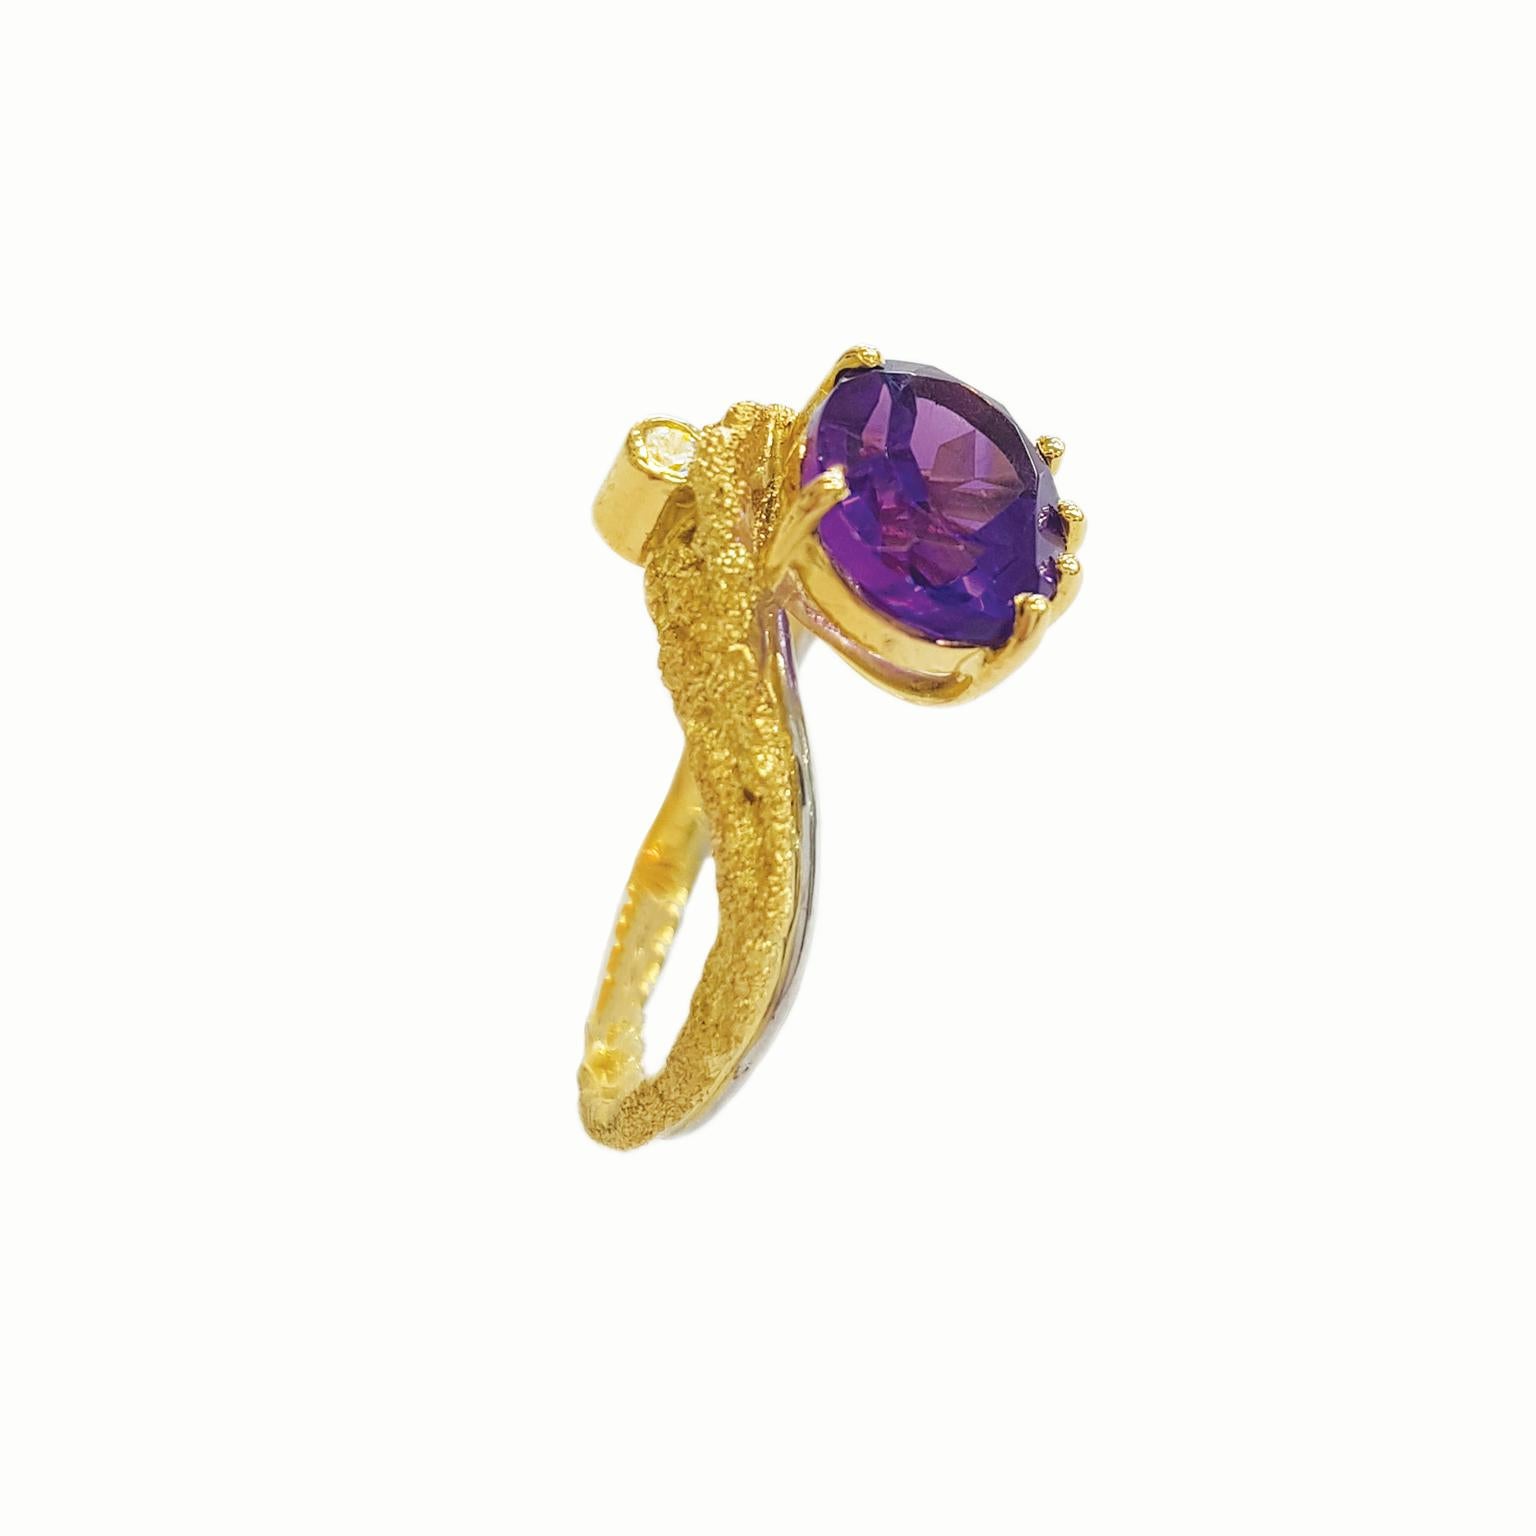 Introducing the epitome of bespoke luxury – Paul Amey's Amethyst Ring, a unique marvel meticulously handcrafted in 18K yellow gold and platinum. Crafted by the artisan himself, this ring is a true testament to the artistry and sophistication that